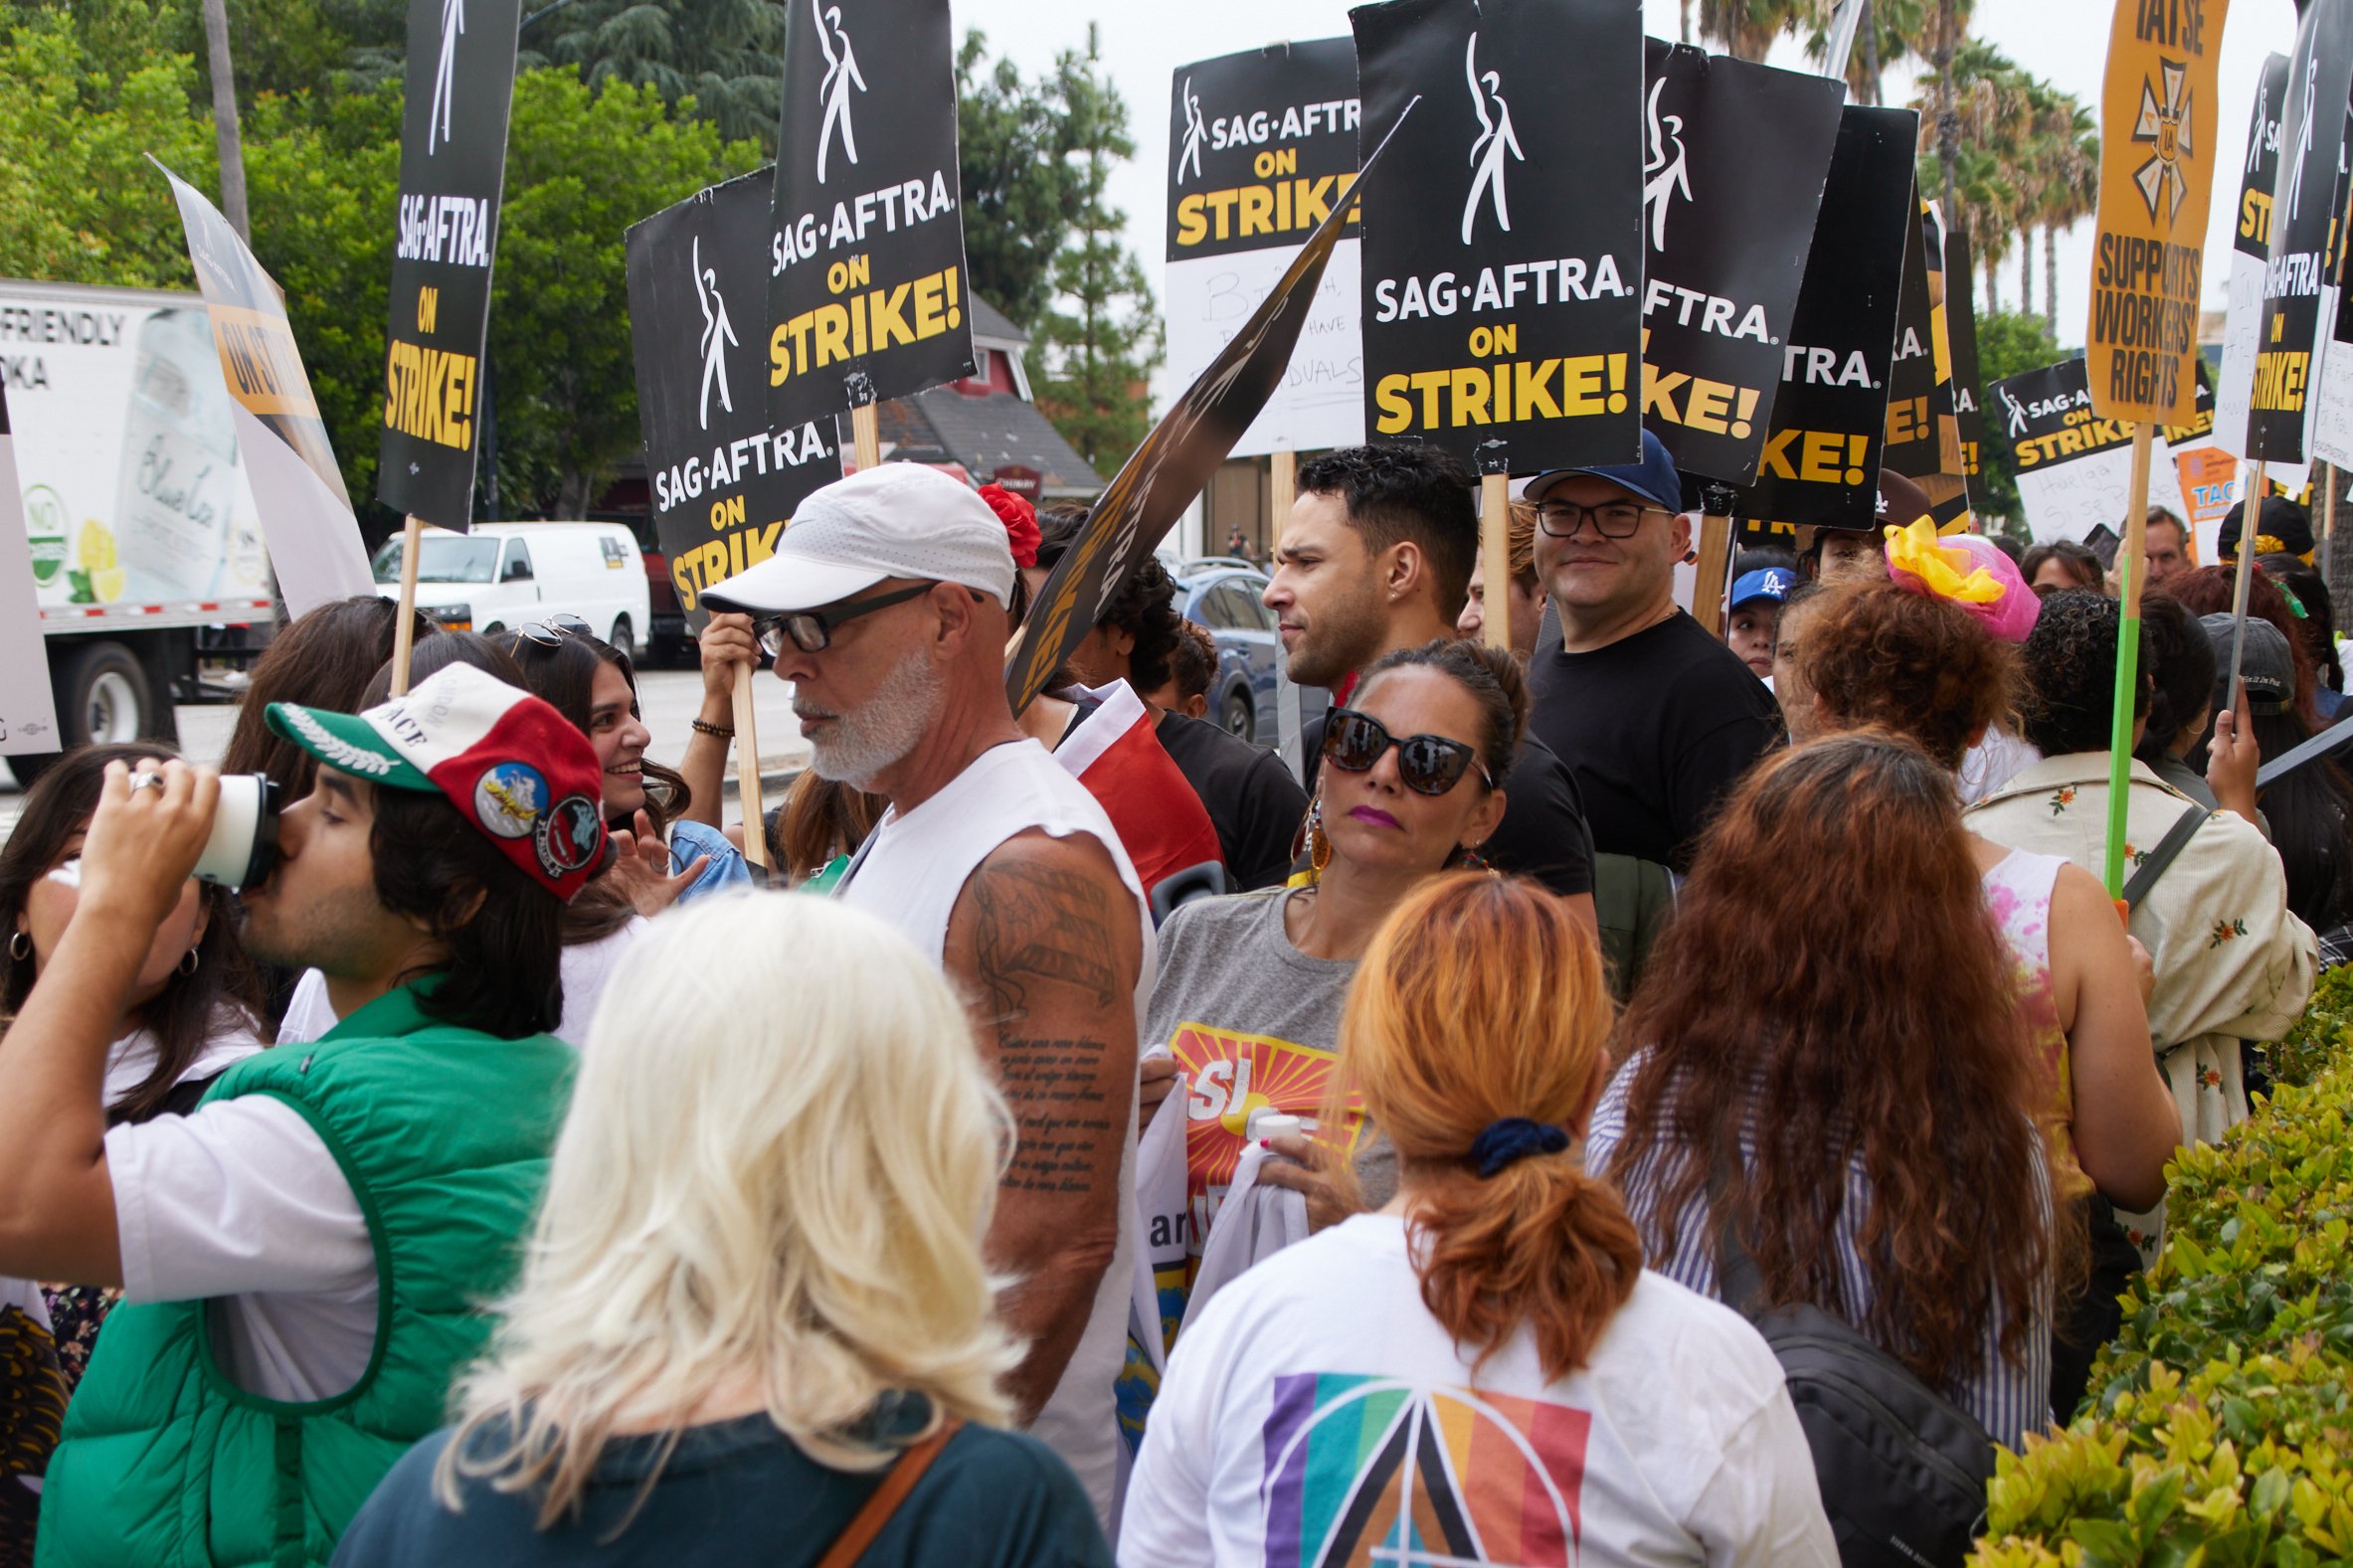  A crowd of picketing SAG-AFTRA members gathered in wait for the traffic light to change to walk across the street in front of Warner Bros. Studios Gate 3, Burbank, Calif., during the SAG-AFTRA strike on Sept 29, 2023. (Danniel Sumarkho | The Corsair